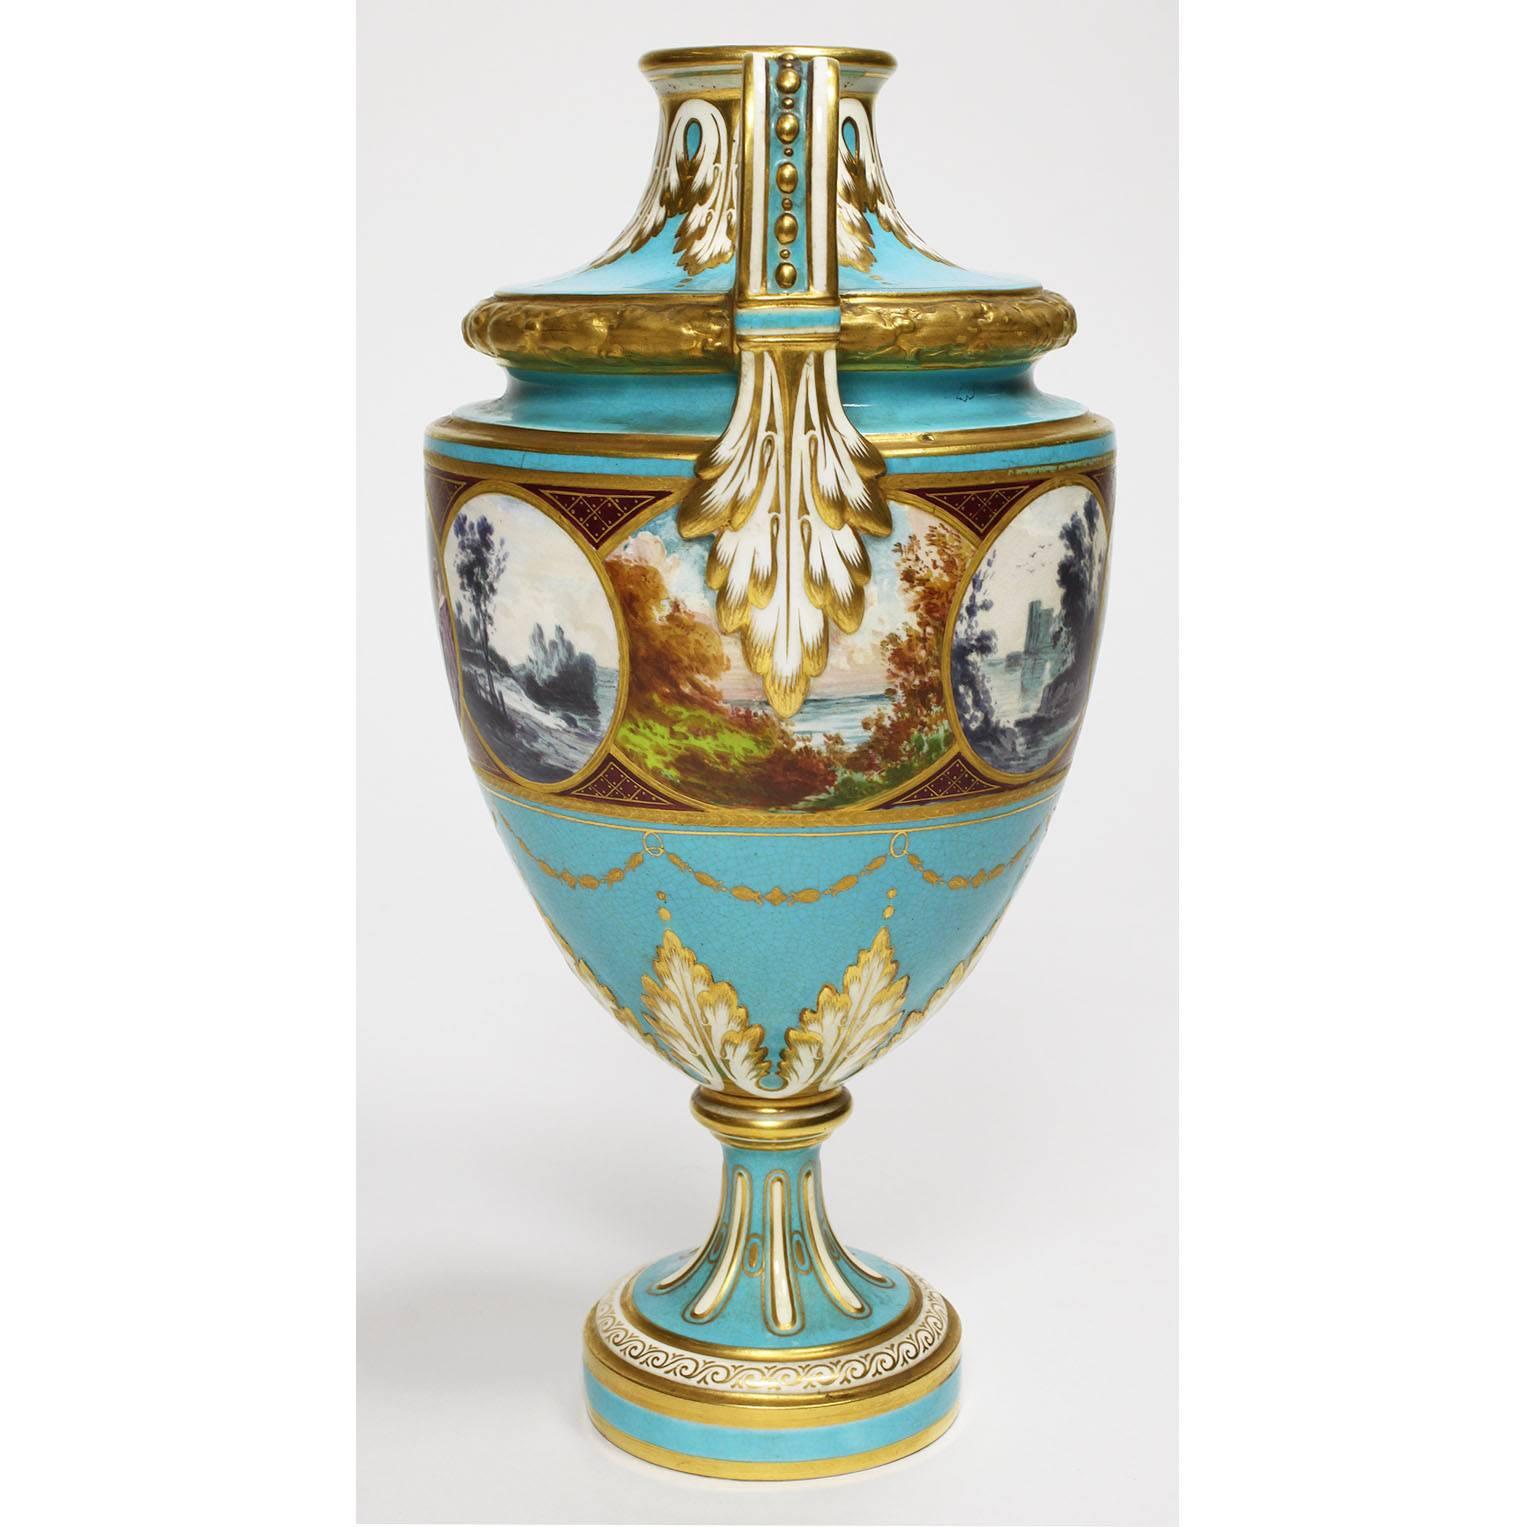 Pair of English 19th Century Turquoise Ground Painted Porcelain Vases by Minton In Good Condition For Sale In Los Angeles, CA